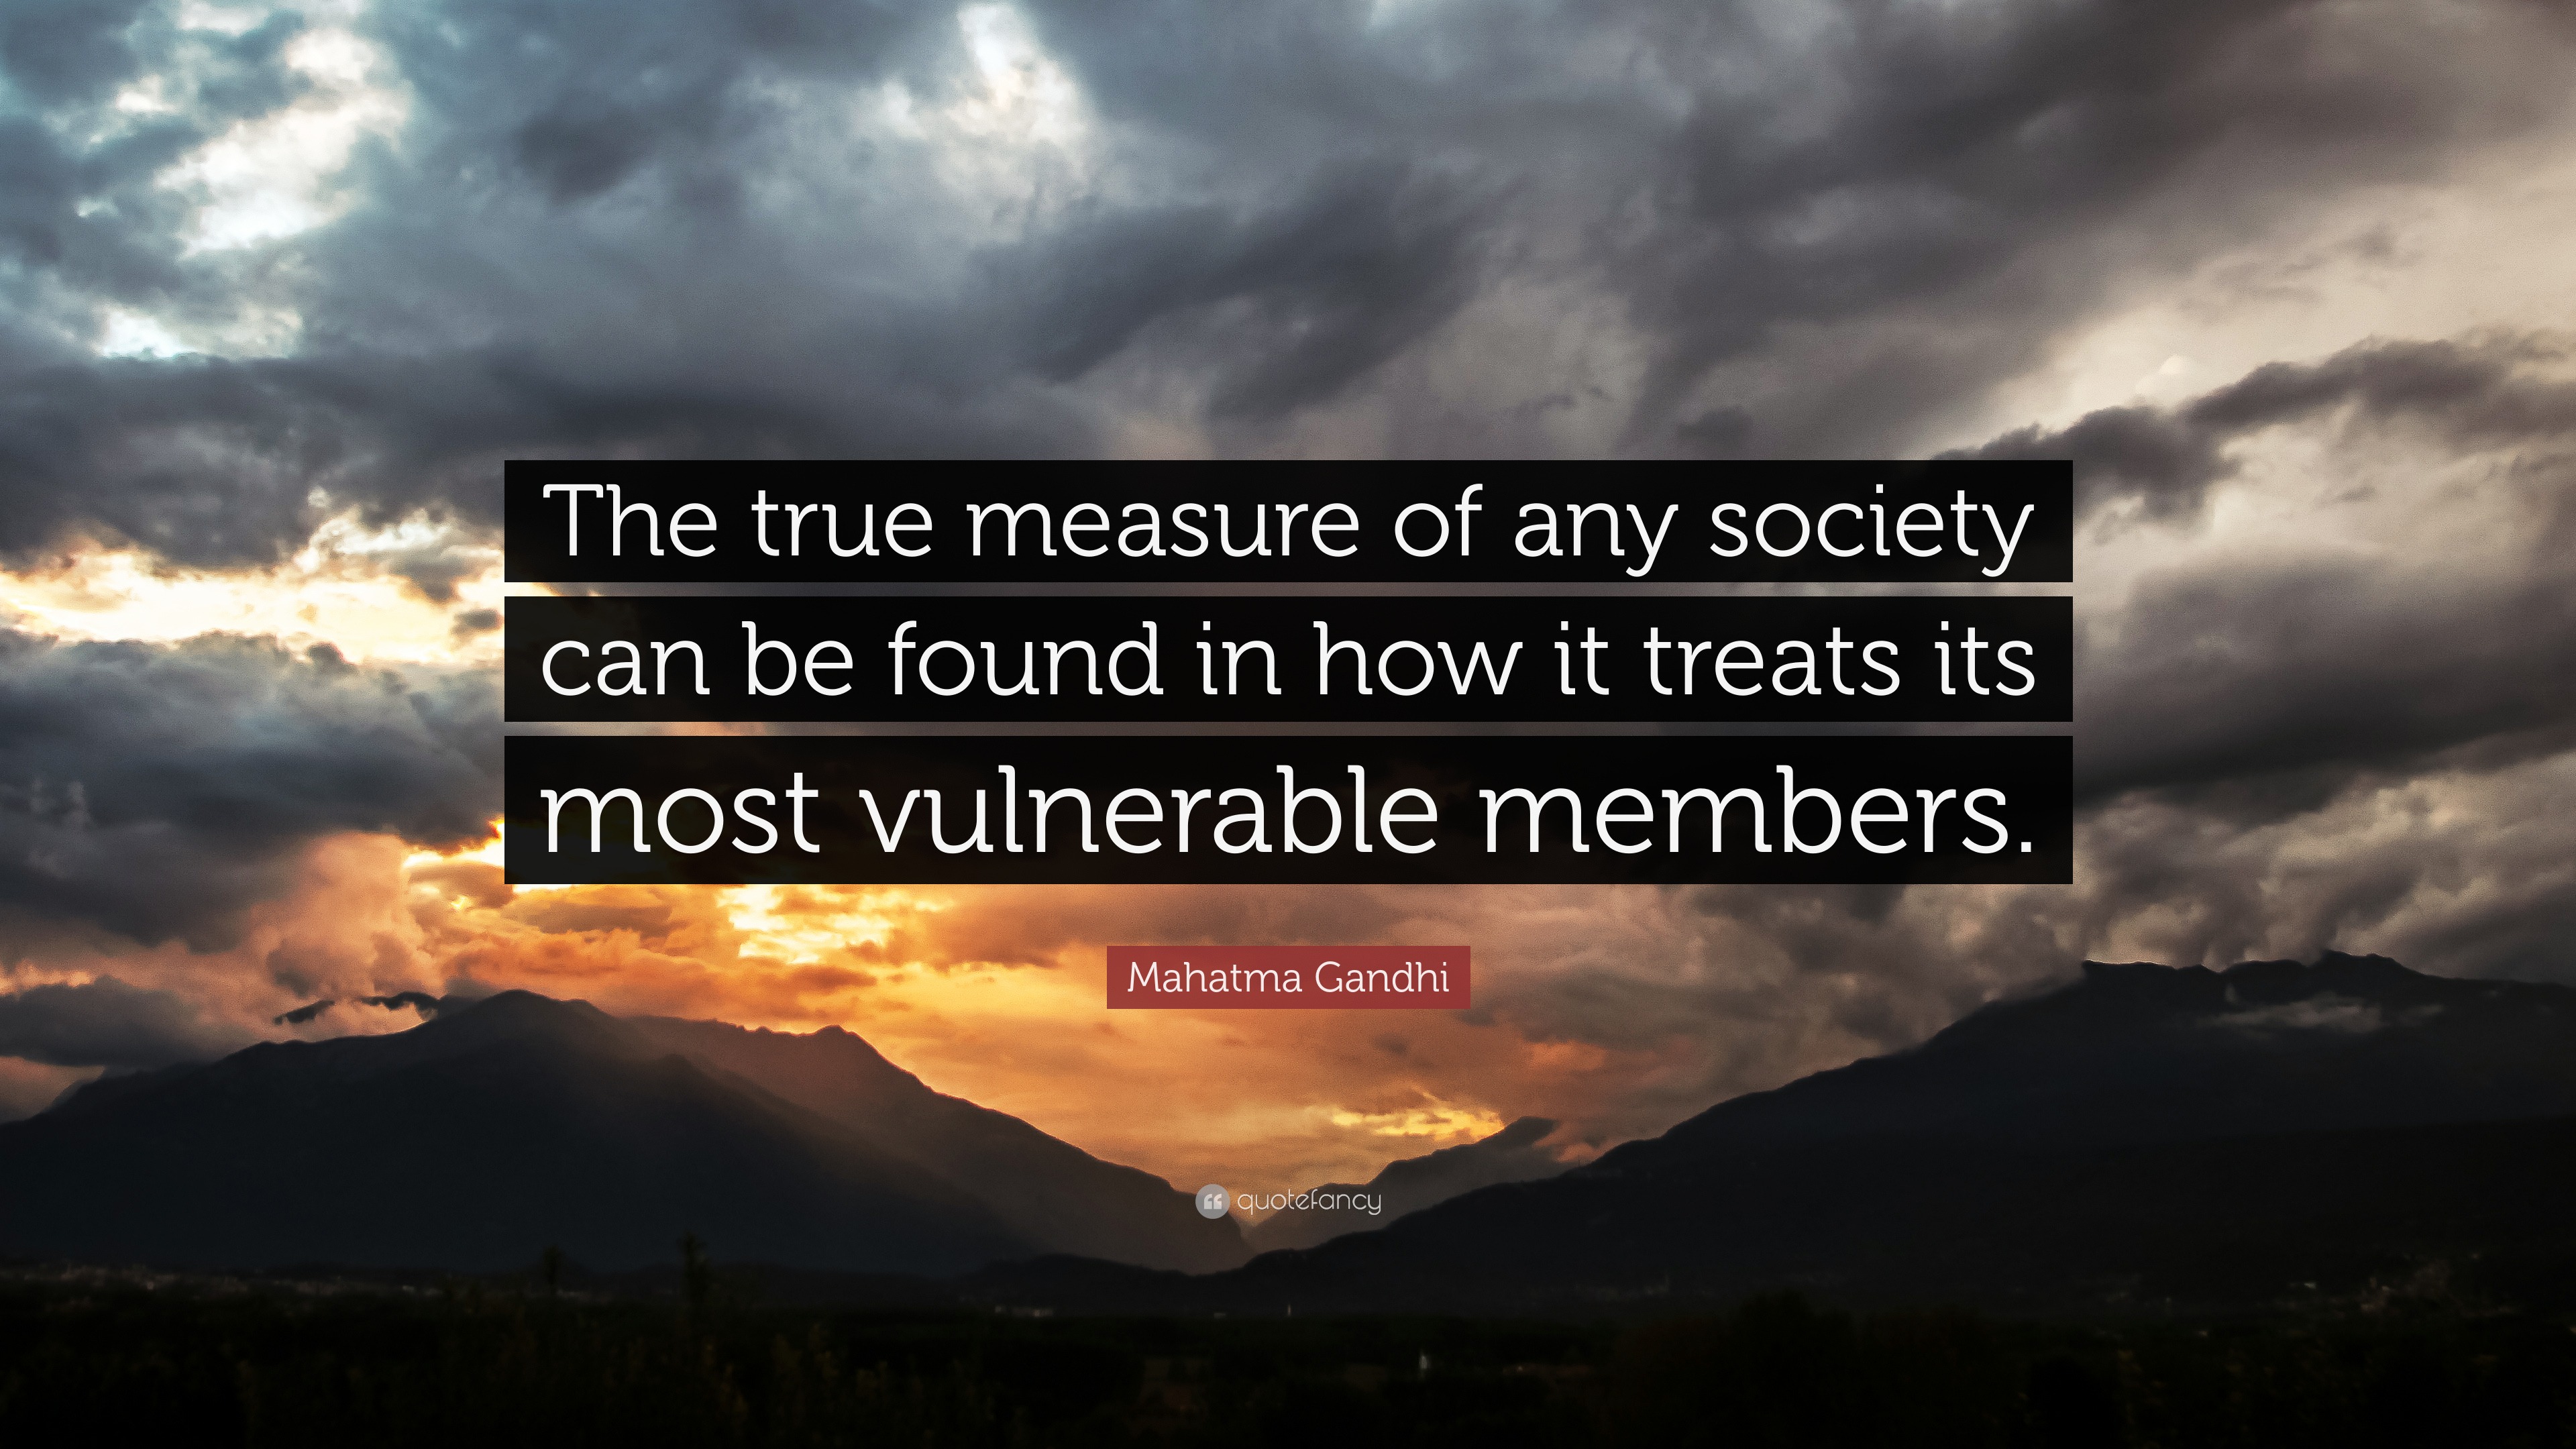 Mahatma Gandhi Quote: “The true measure of any society can be found in how  it treats